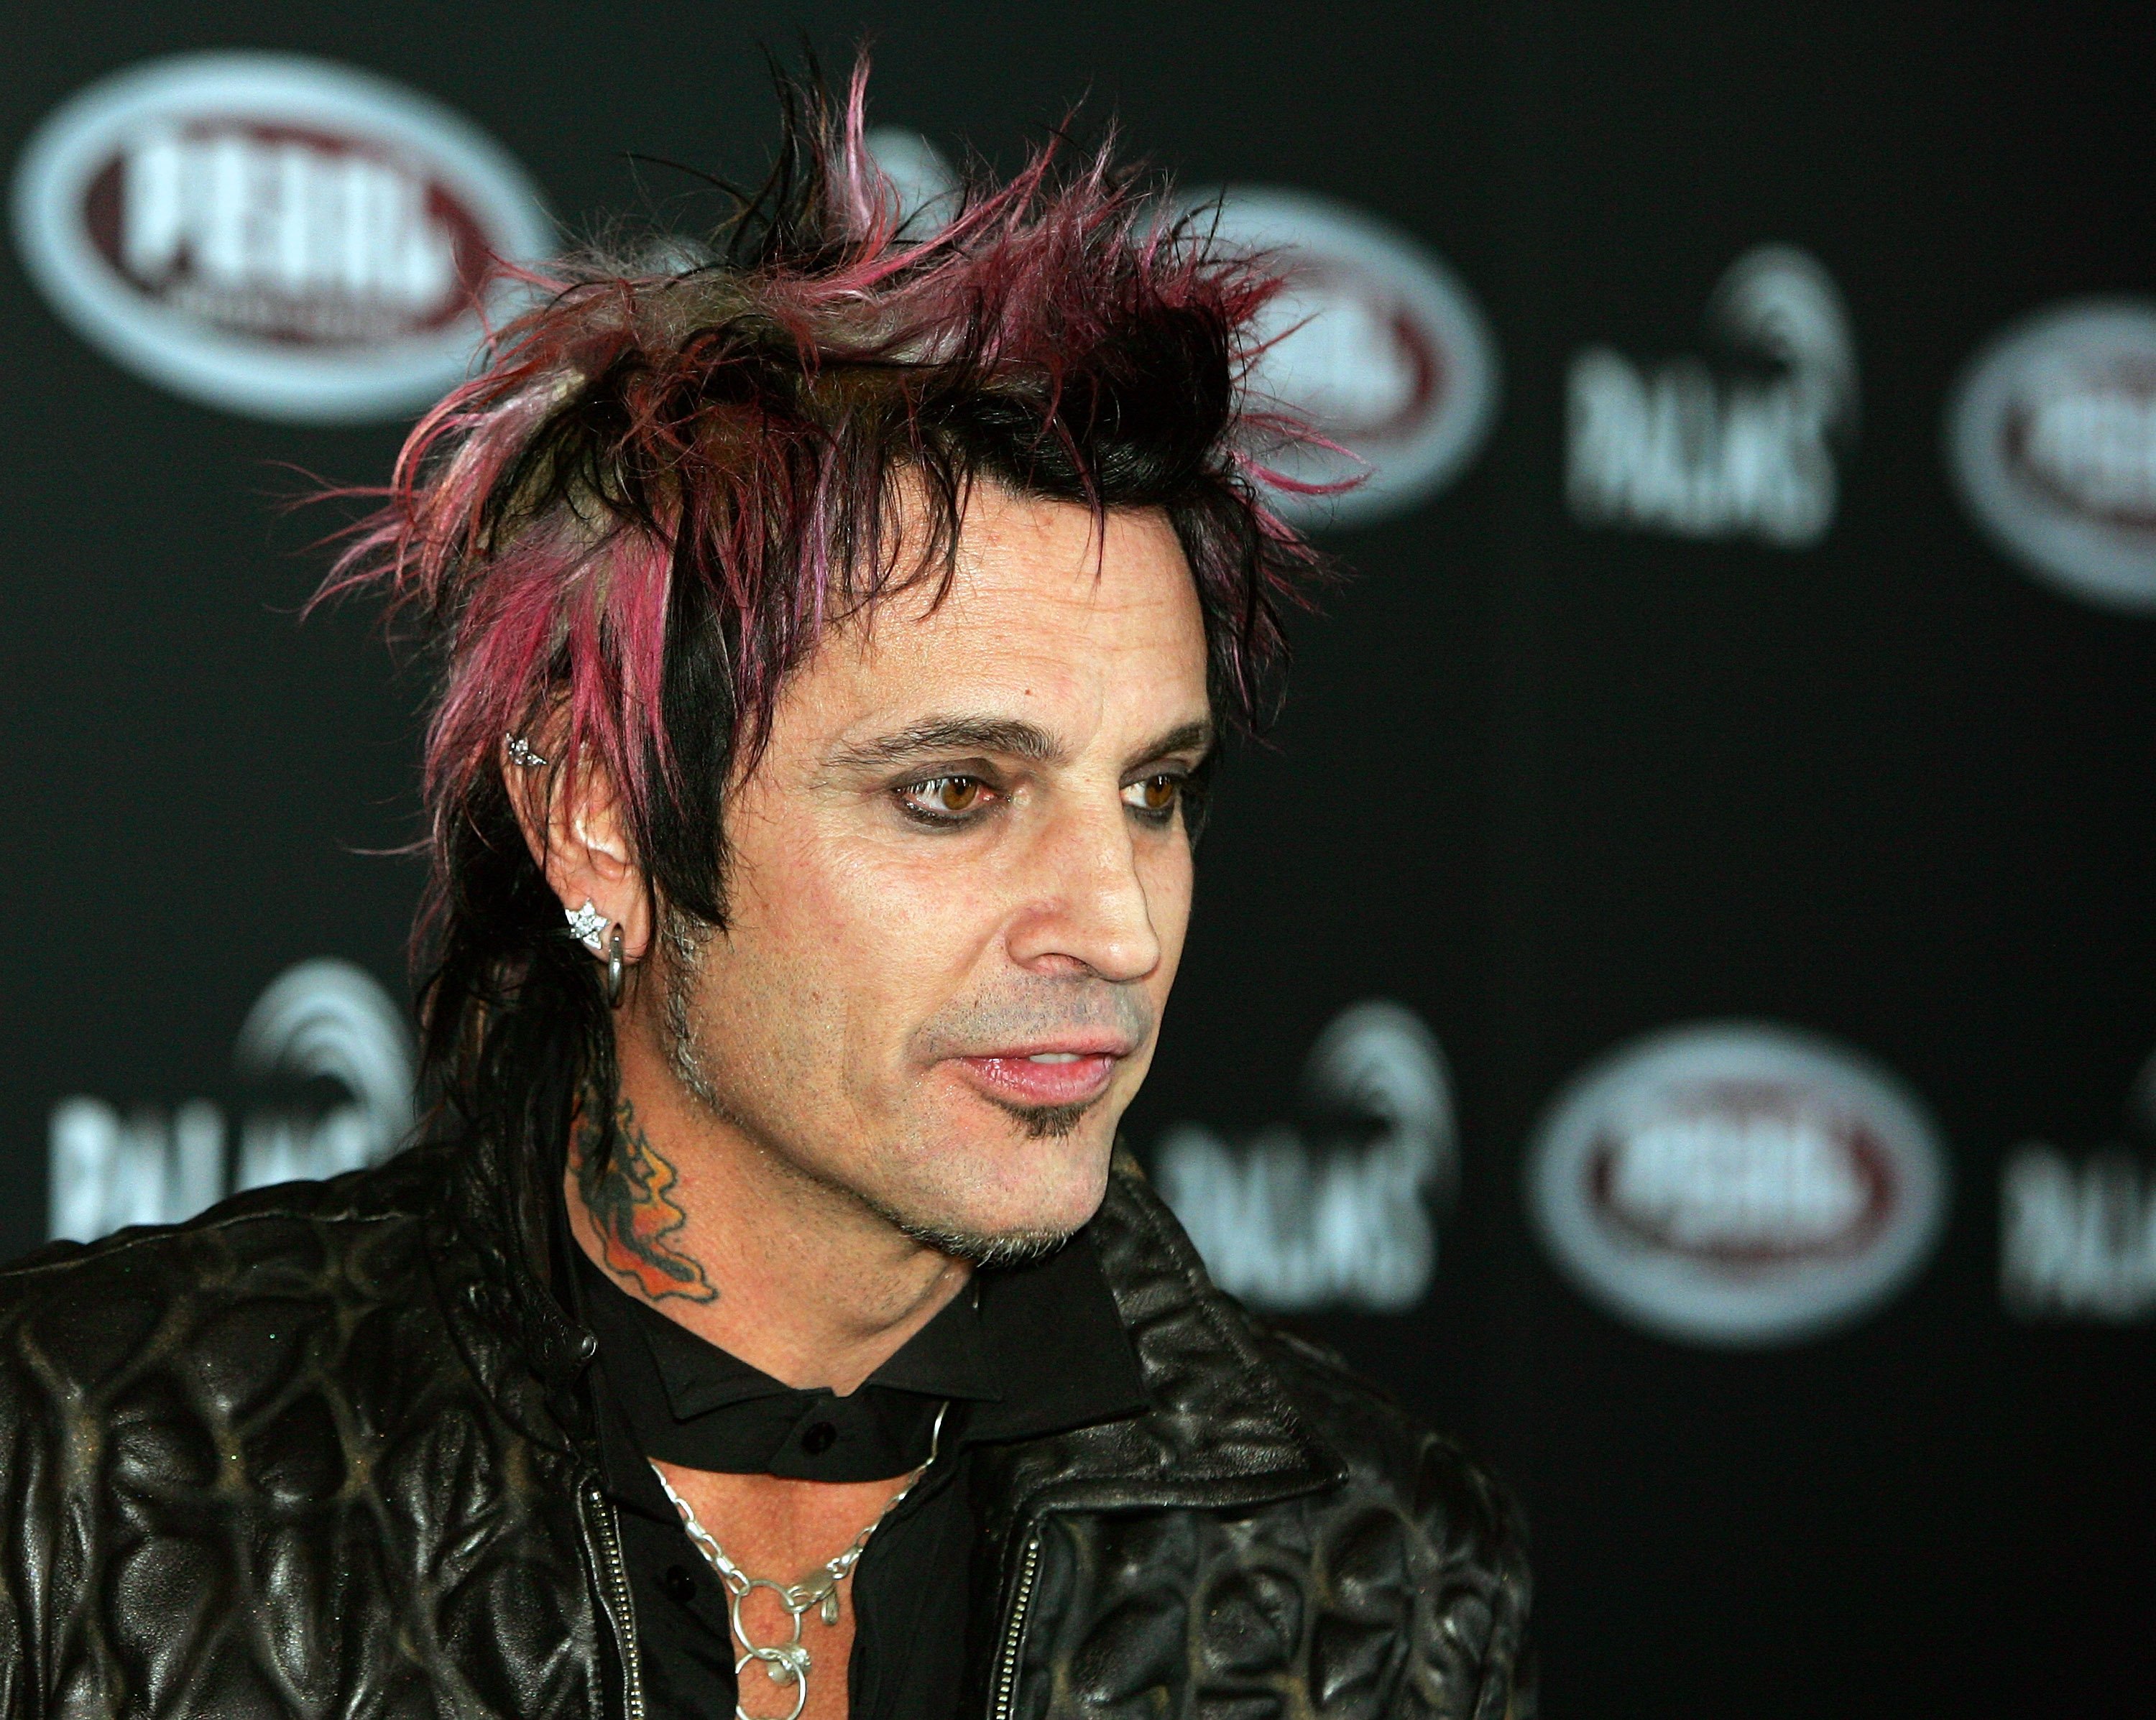 Tommy Lee arrives at the Palms Casino Resort April 21, 2007, in Las Vegas, Nevada. | Source: Getty Images.